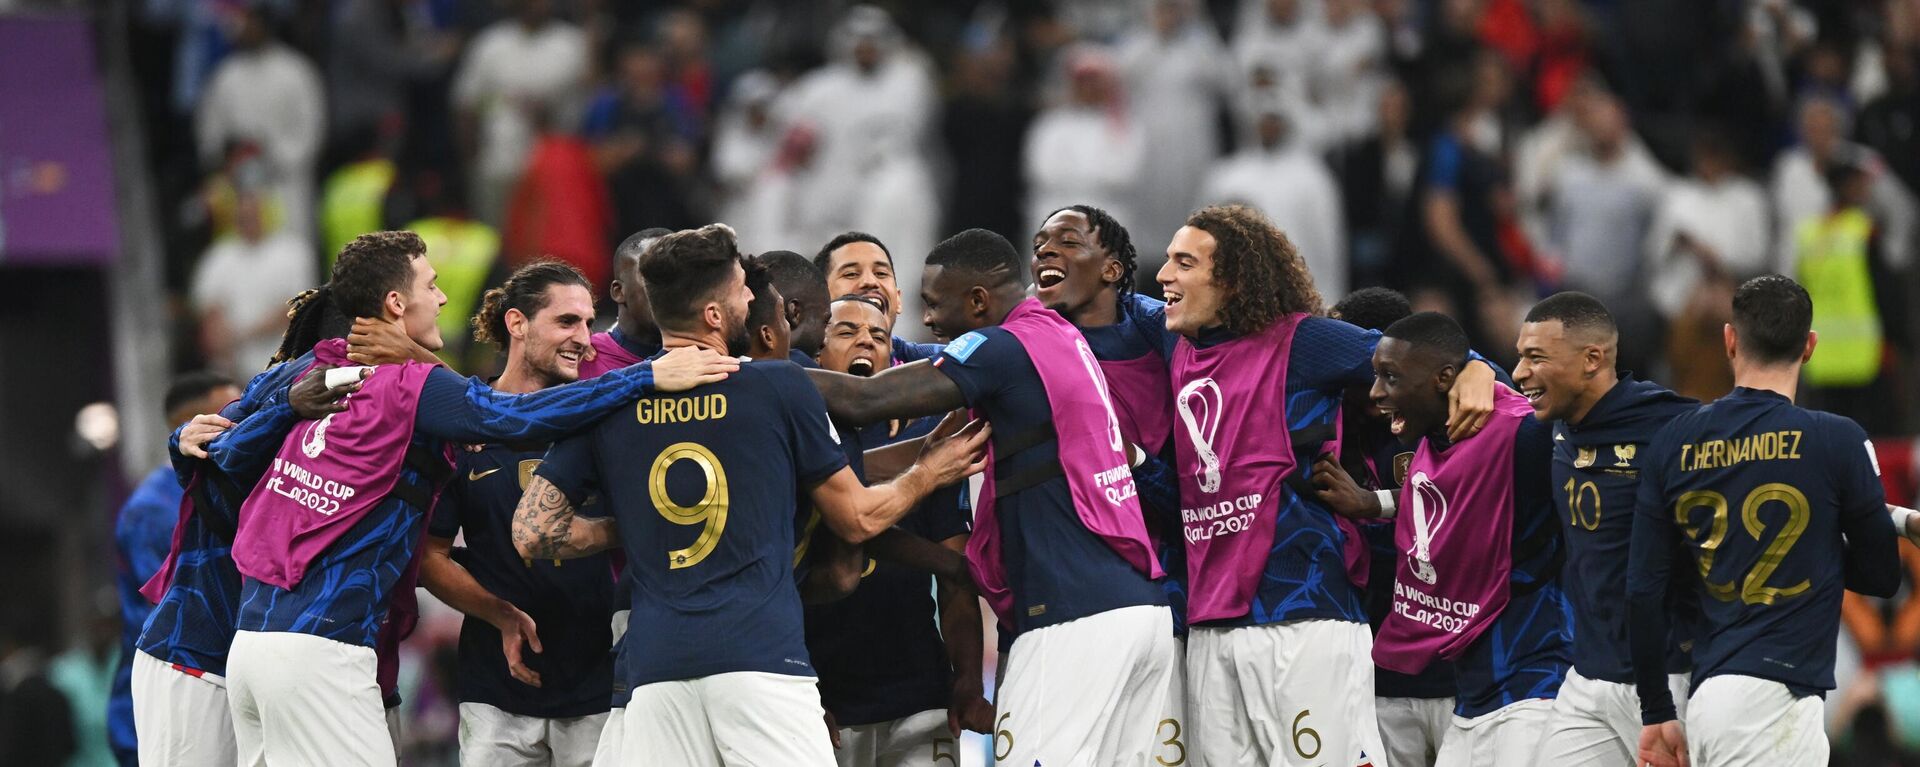 French players celebrate their victory in the quarterfinal match of the World Cup against England. - Sputnik International, 1920, 14.12.2022